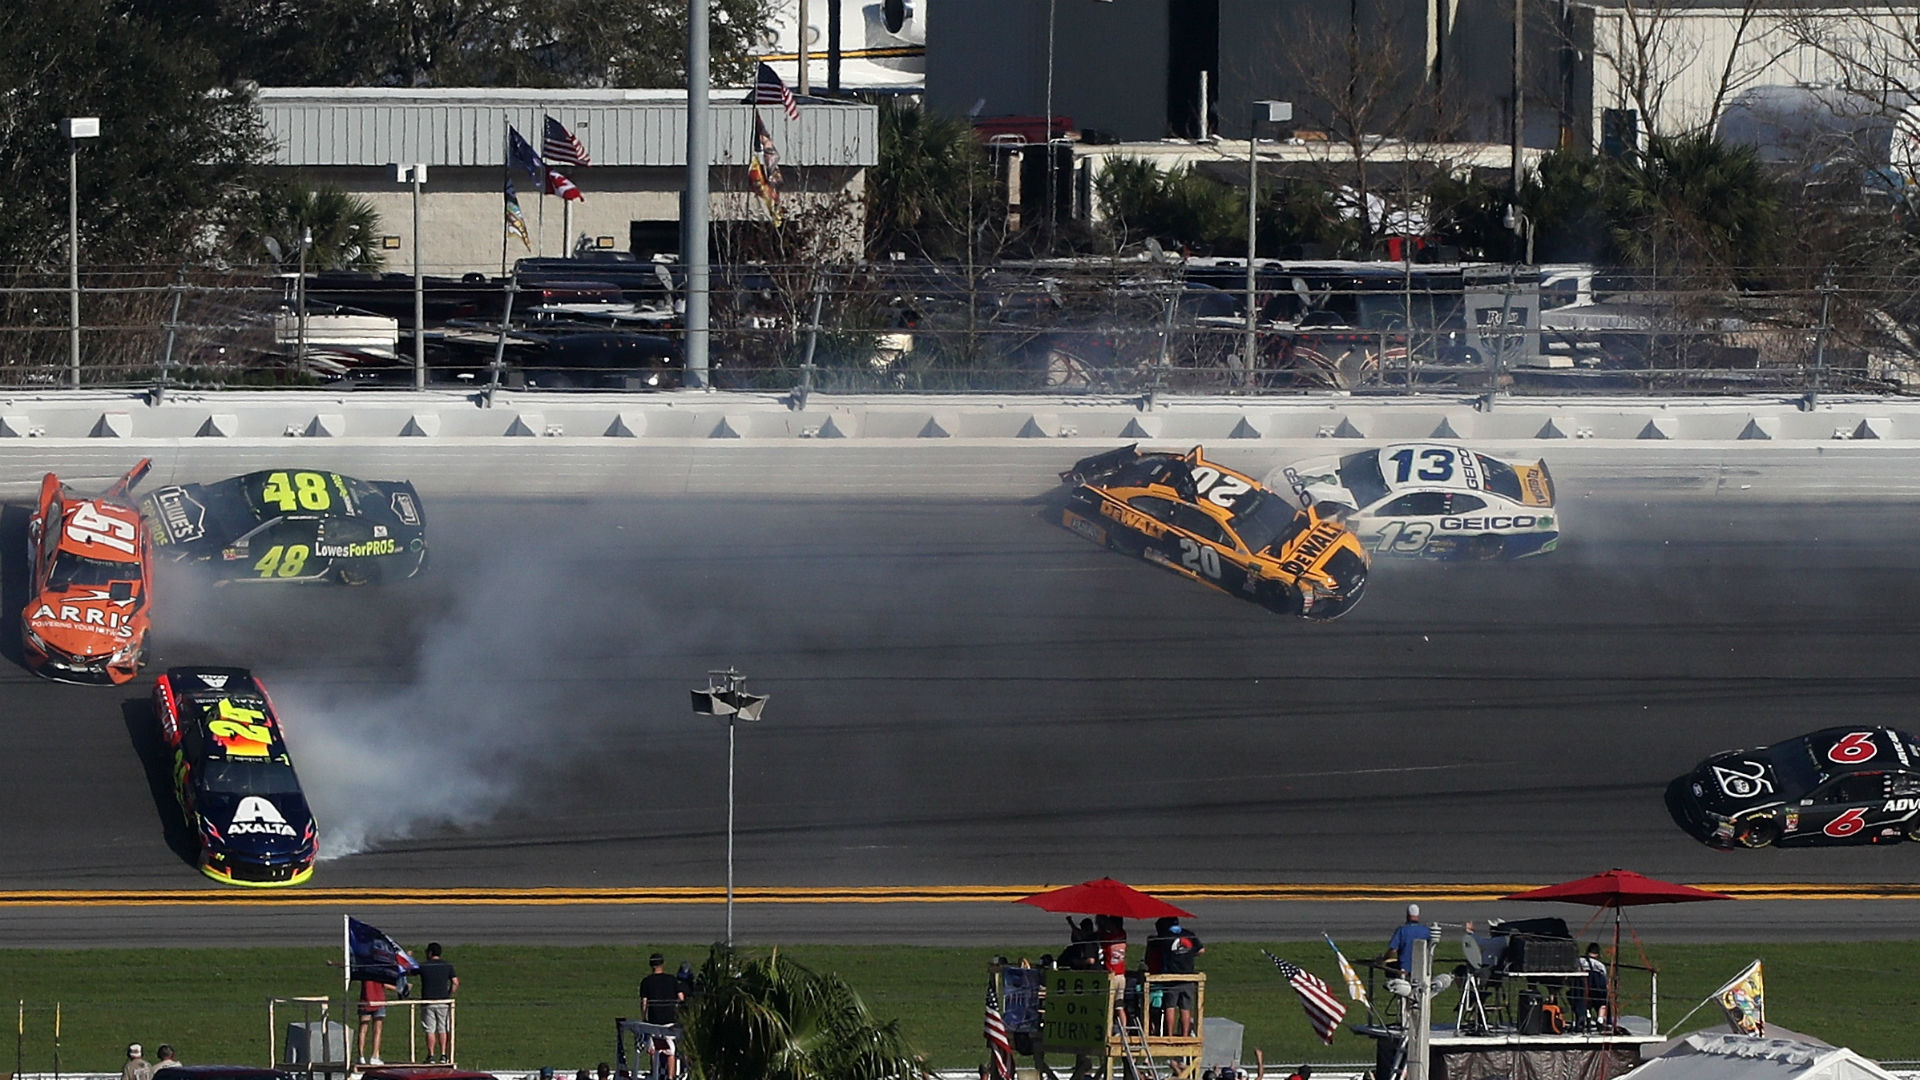 Watch: Kyle Busch, Jimmie Johnson, others crash early in 2018 Daytona 500